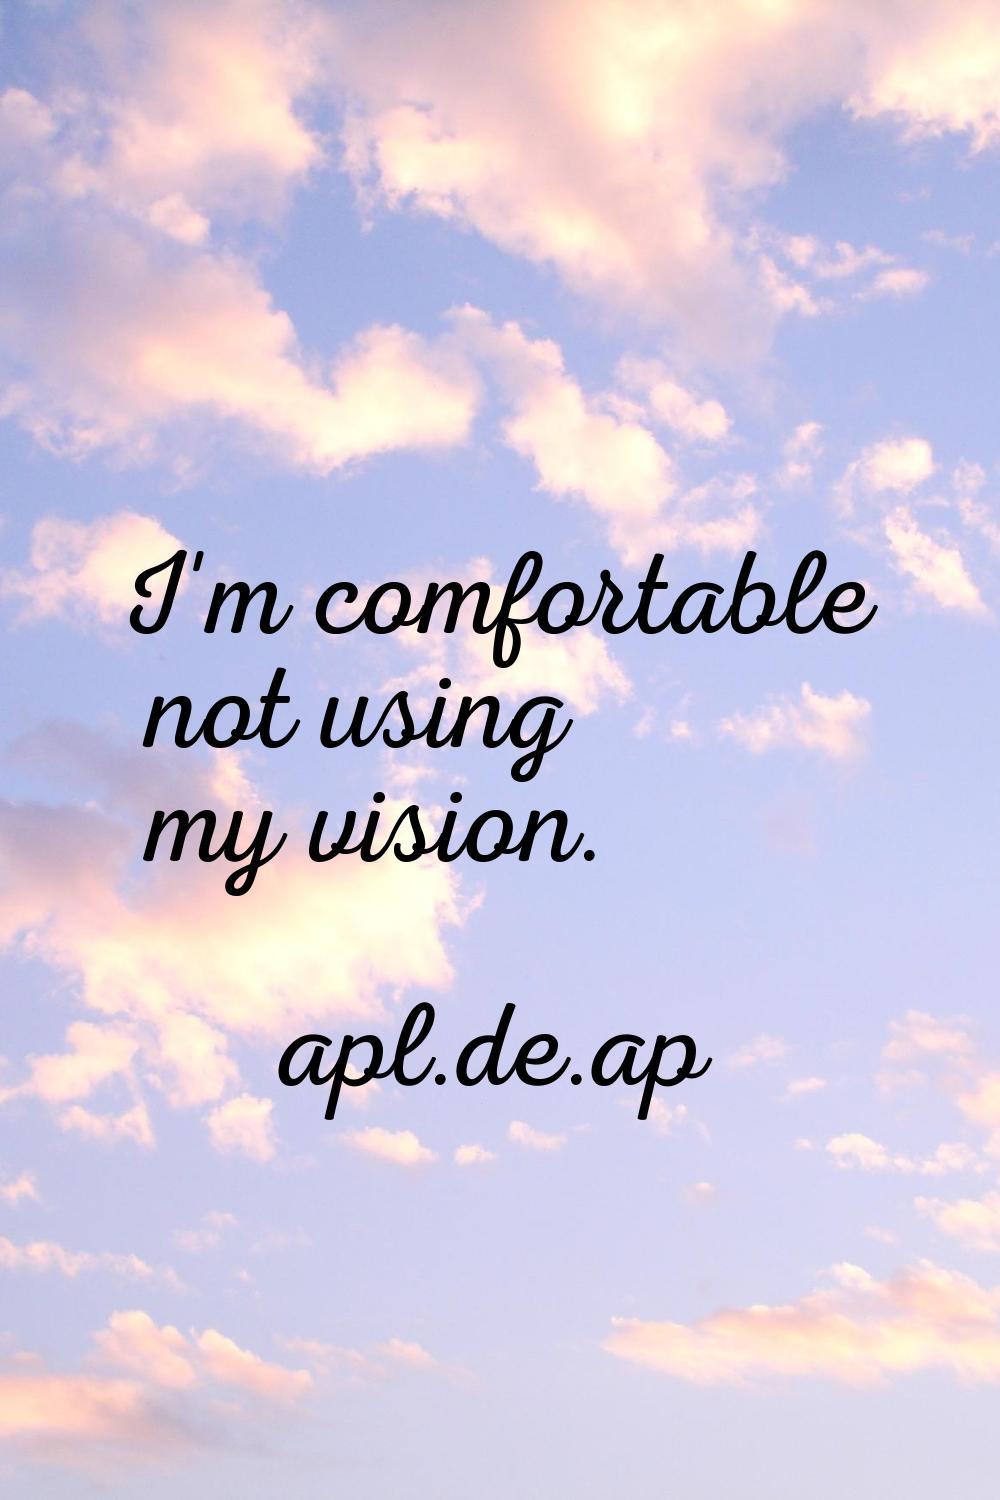 I'm comfortable not using my vision.